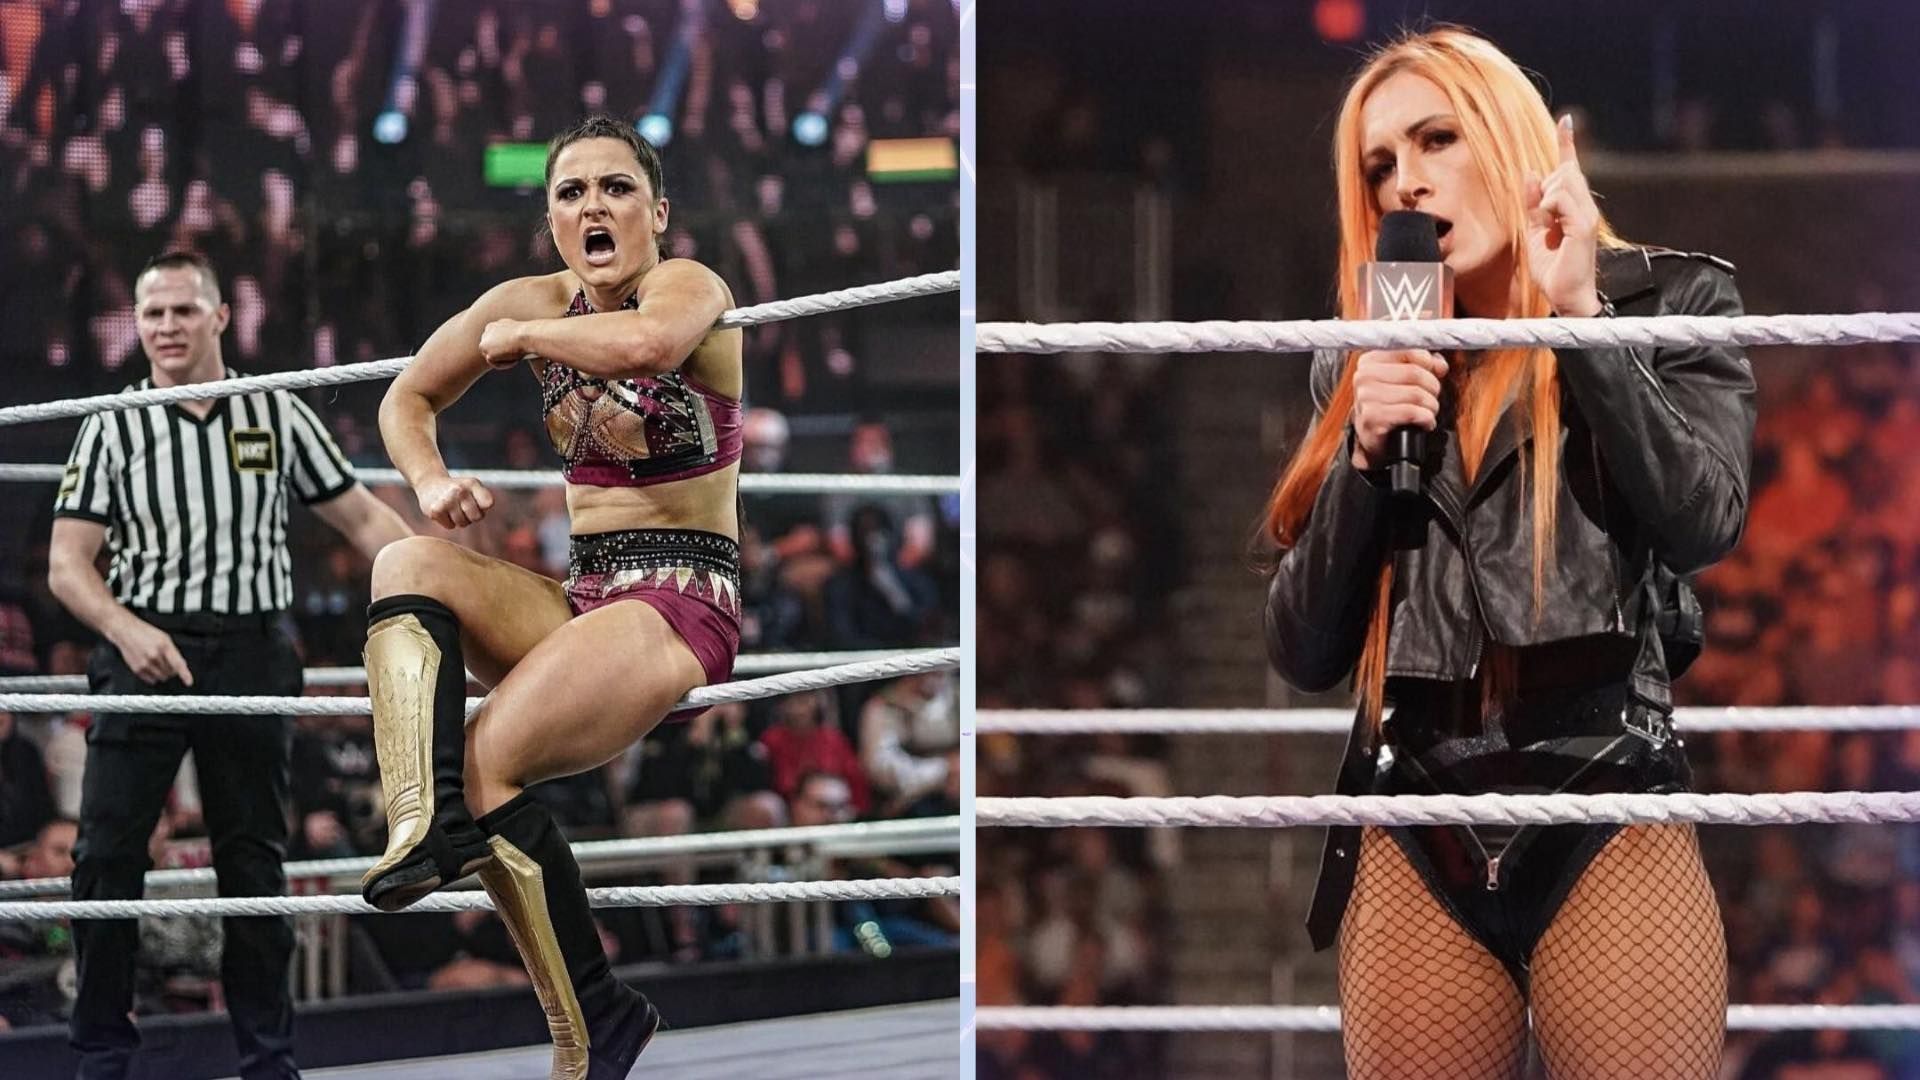 Lyra Valkyria and Becky Lynch have a pre-WWE relationship